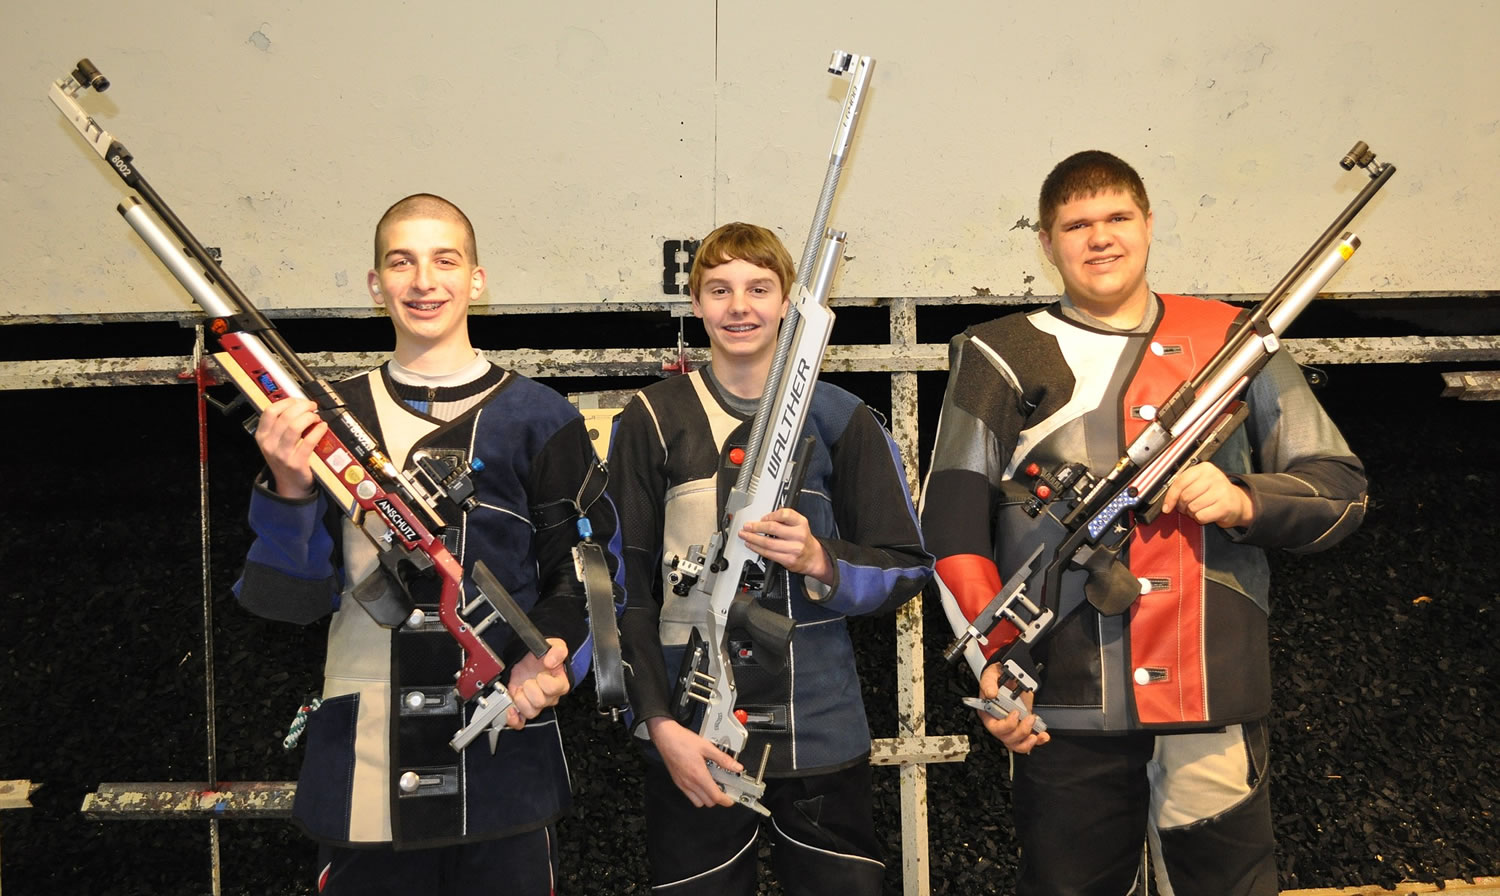 Qualifying in air rifle for the USA Shooting National Junior Olympic Championships were (from left) Casper Schadler, 15, Tyler Horn, 13, and Kyle Ueltschi, 18.